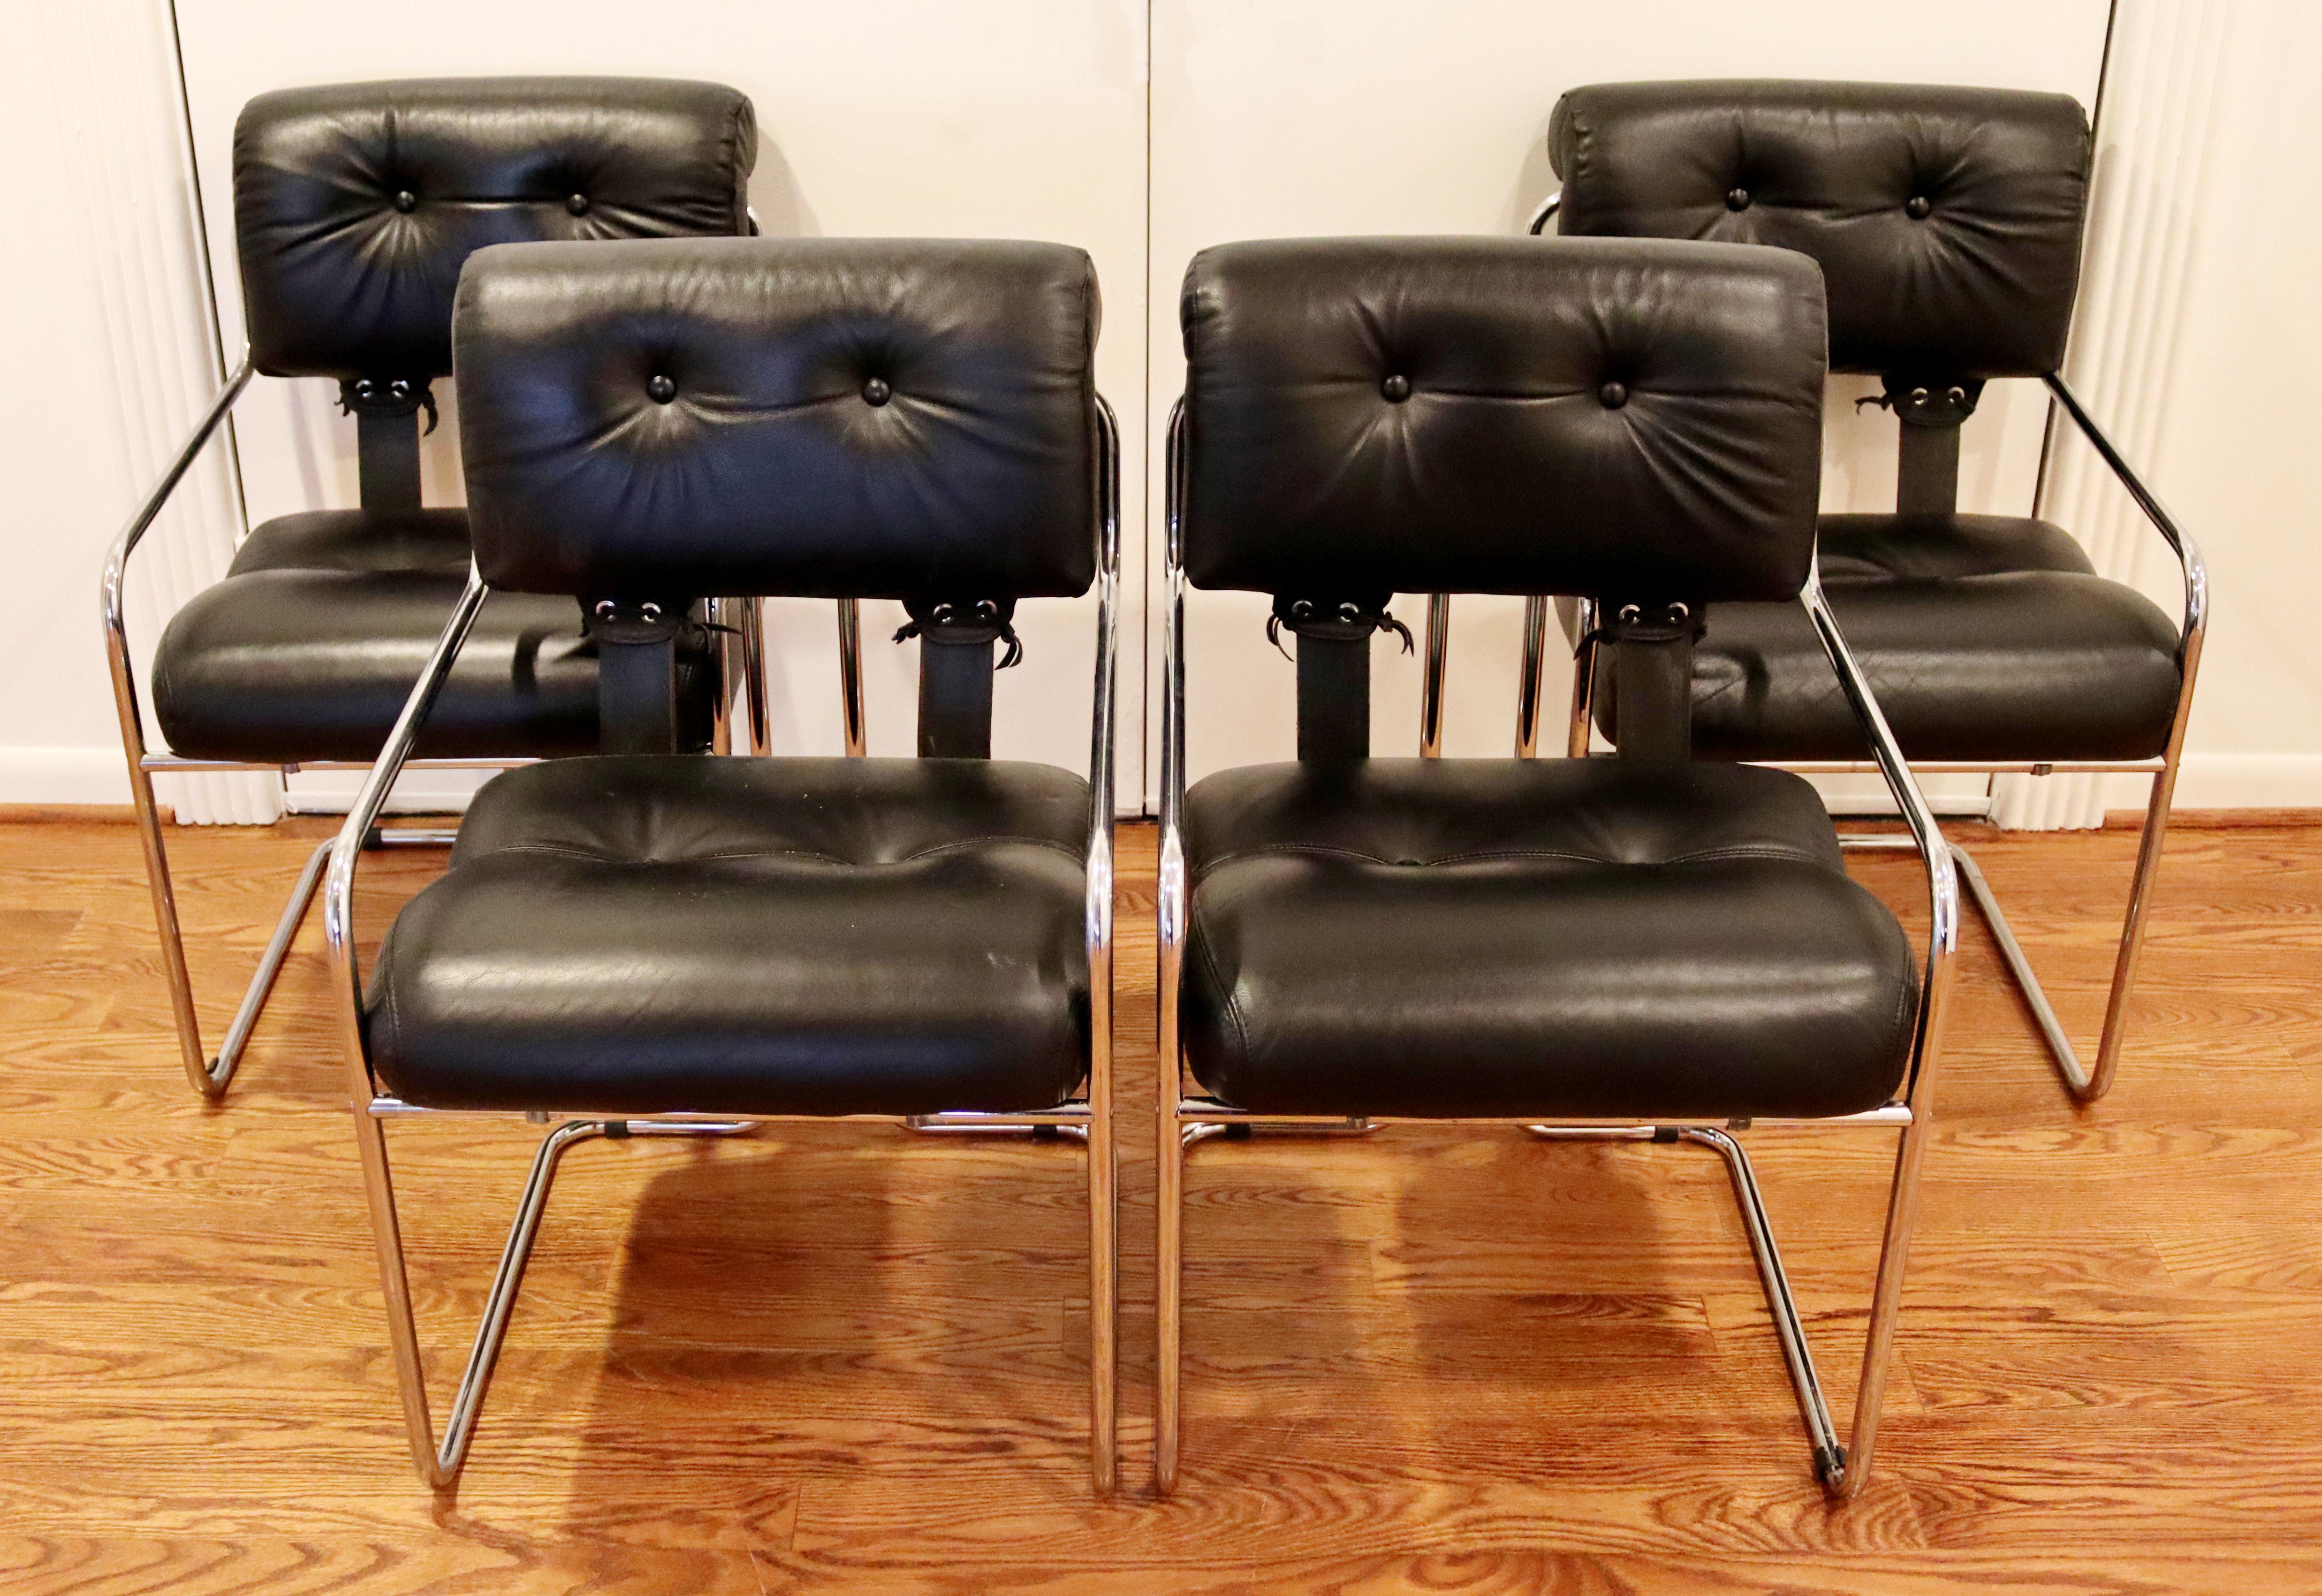 For your consideration is a beautiful set of four, chrome and black Pace Tucoma black, tufted dining armchairs, circa the 1970s. In very good vintage condition. The dimensions are 20.5